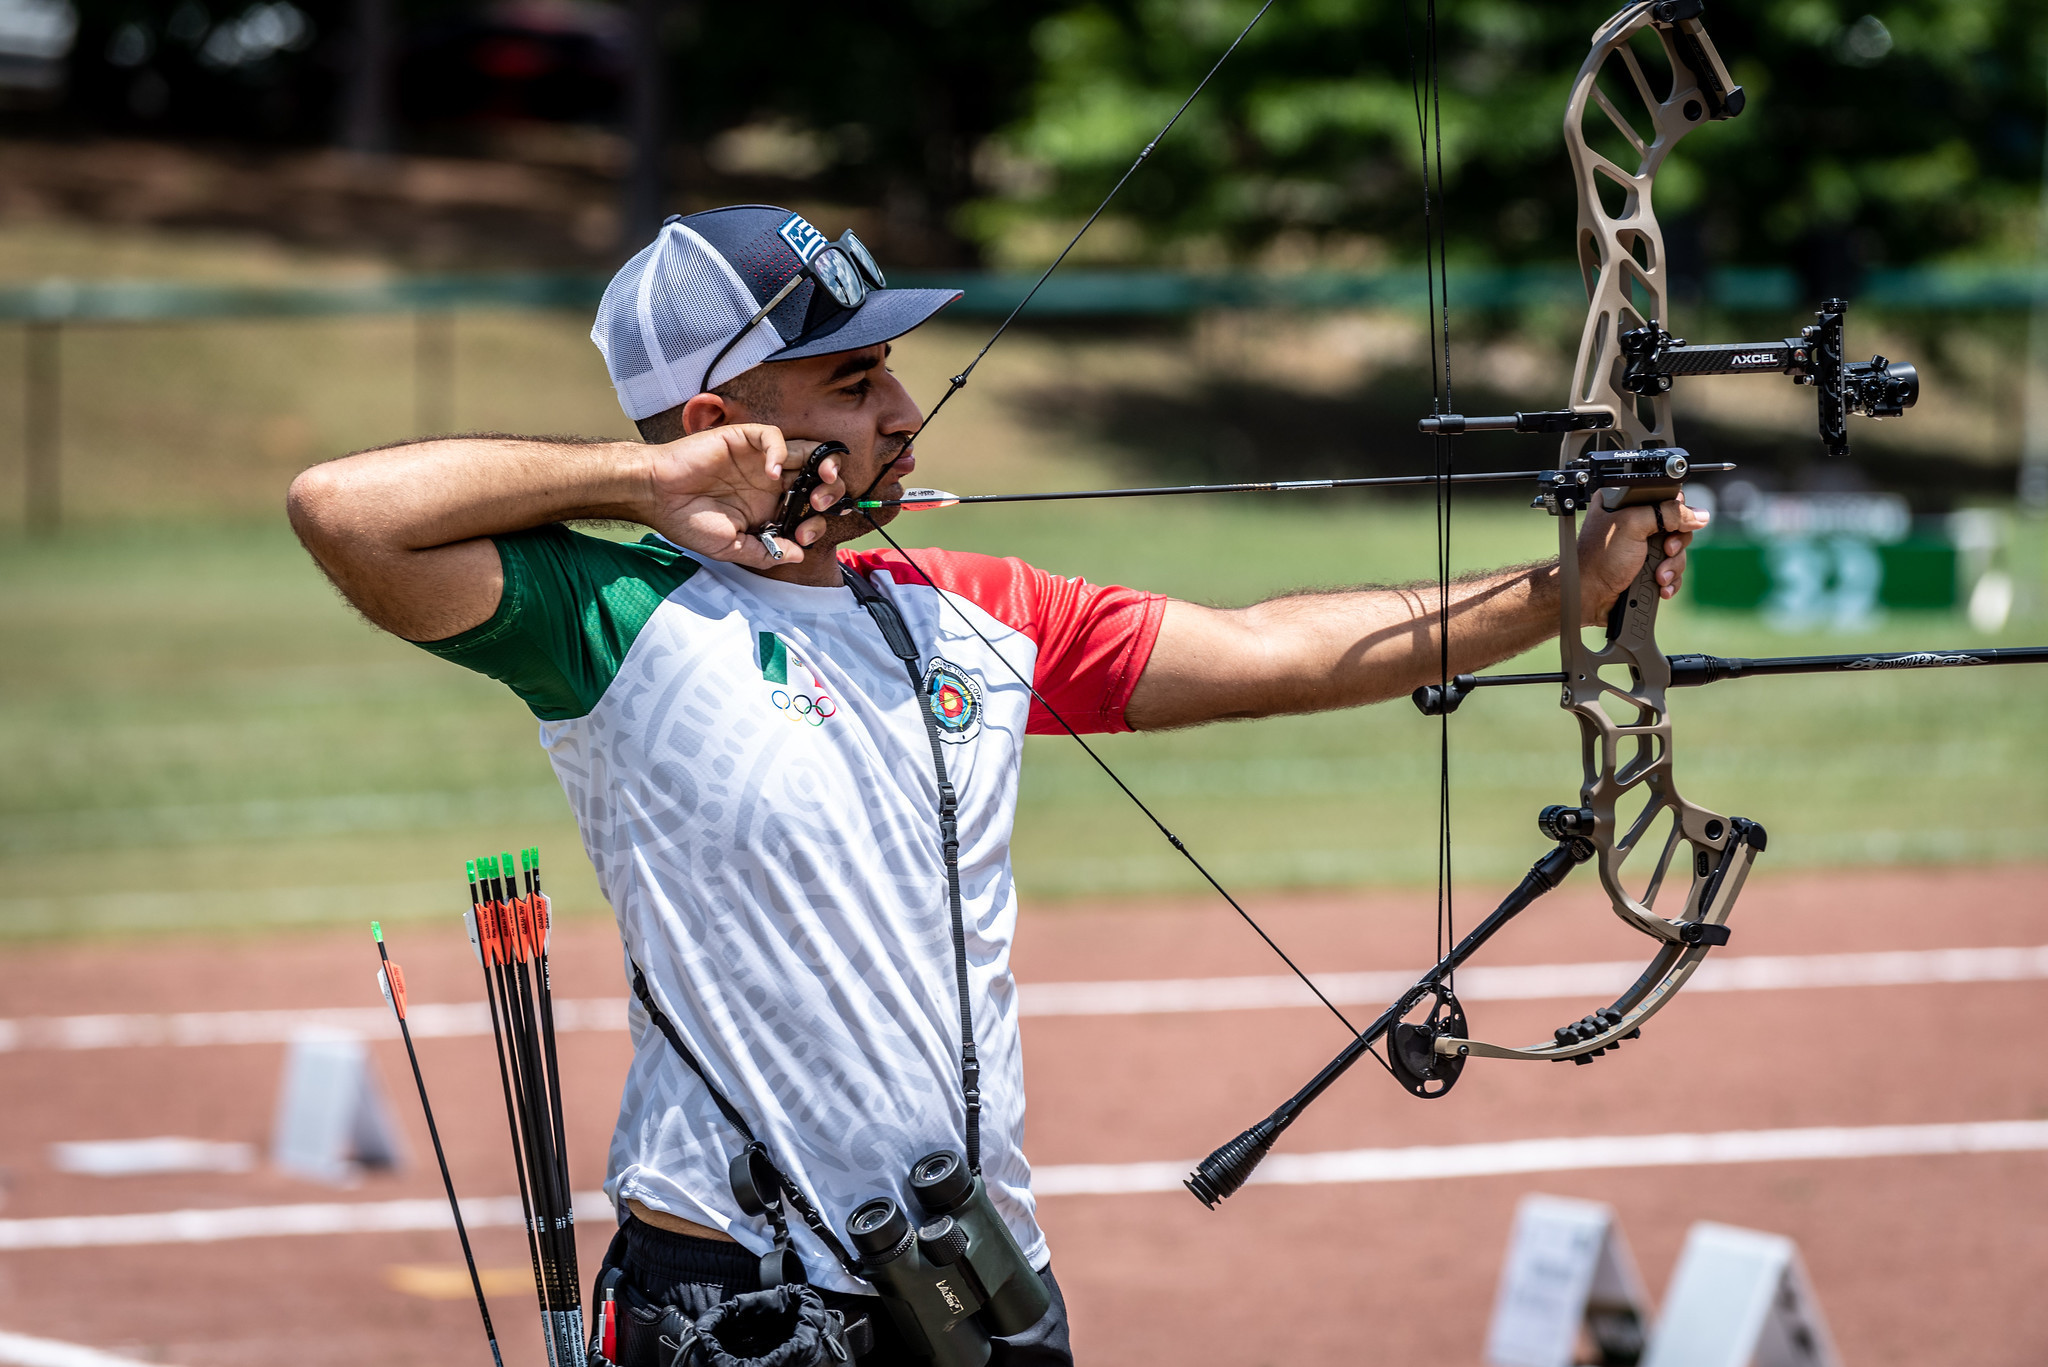 Miguel Becerra claimed the men's compound gold today in Birmingham ©World Games